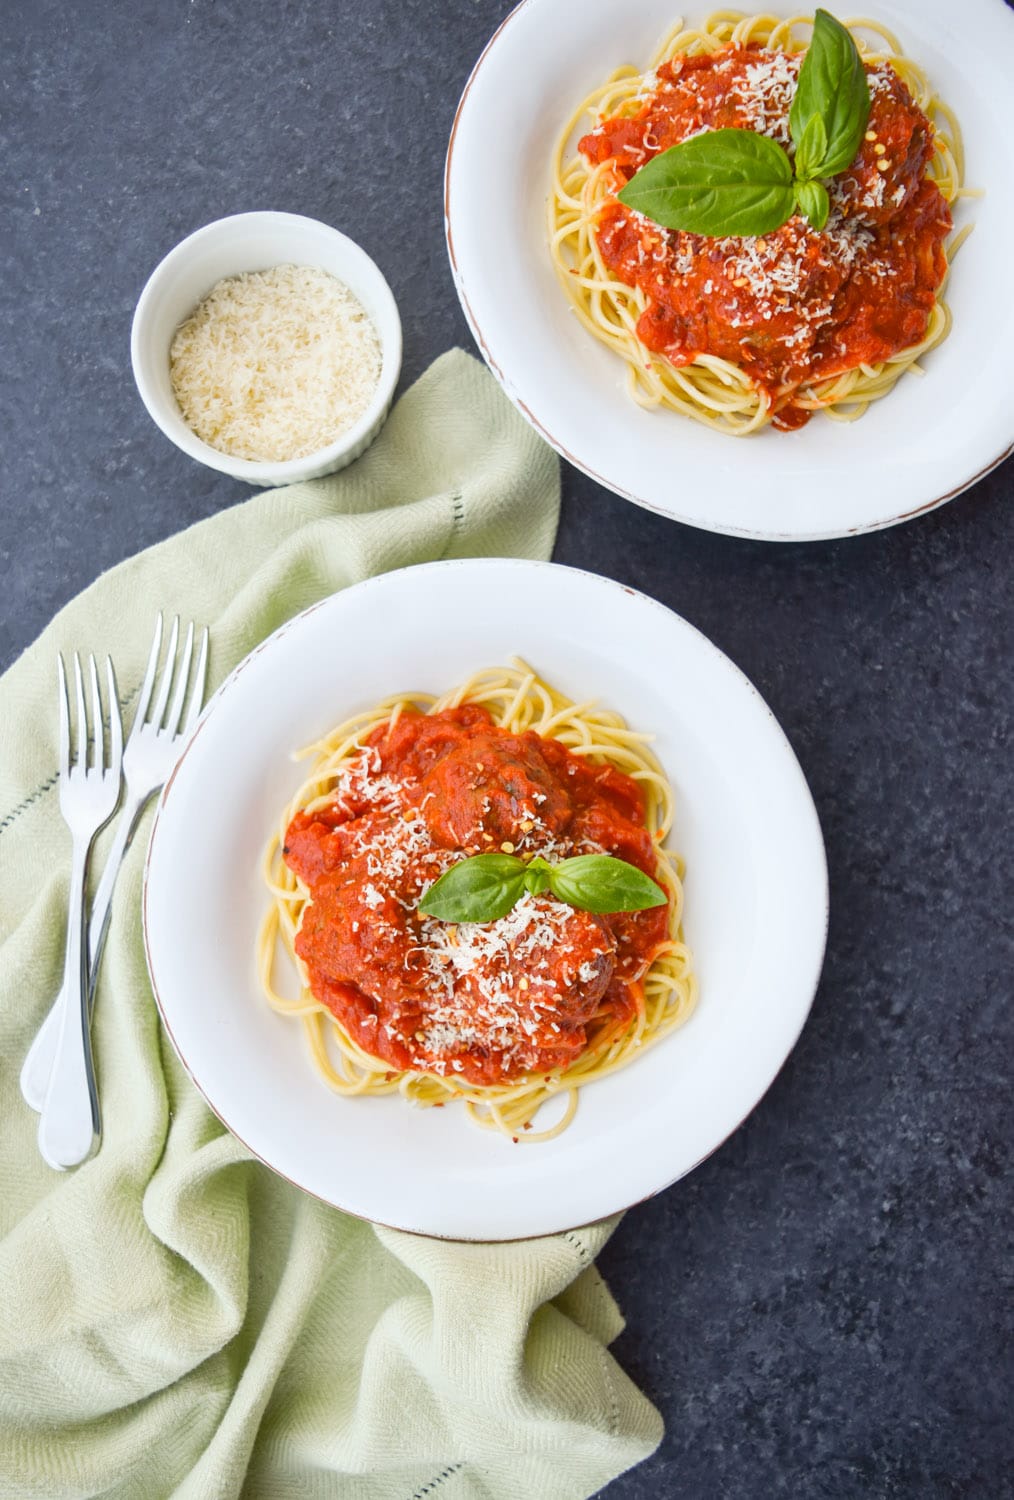 Two plated servings of easy spaghetti and meatballs with Rao's marinara sauce.